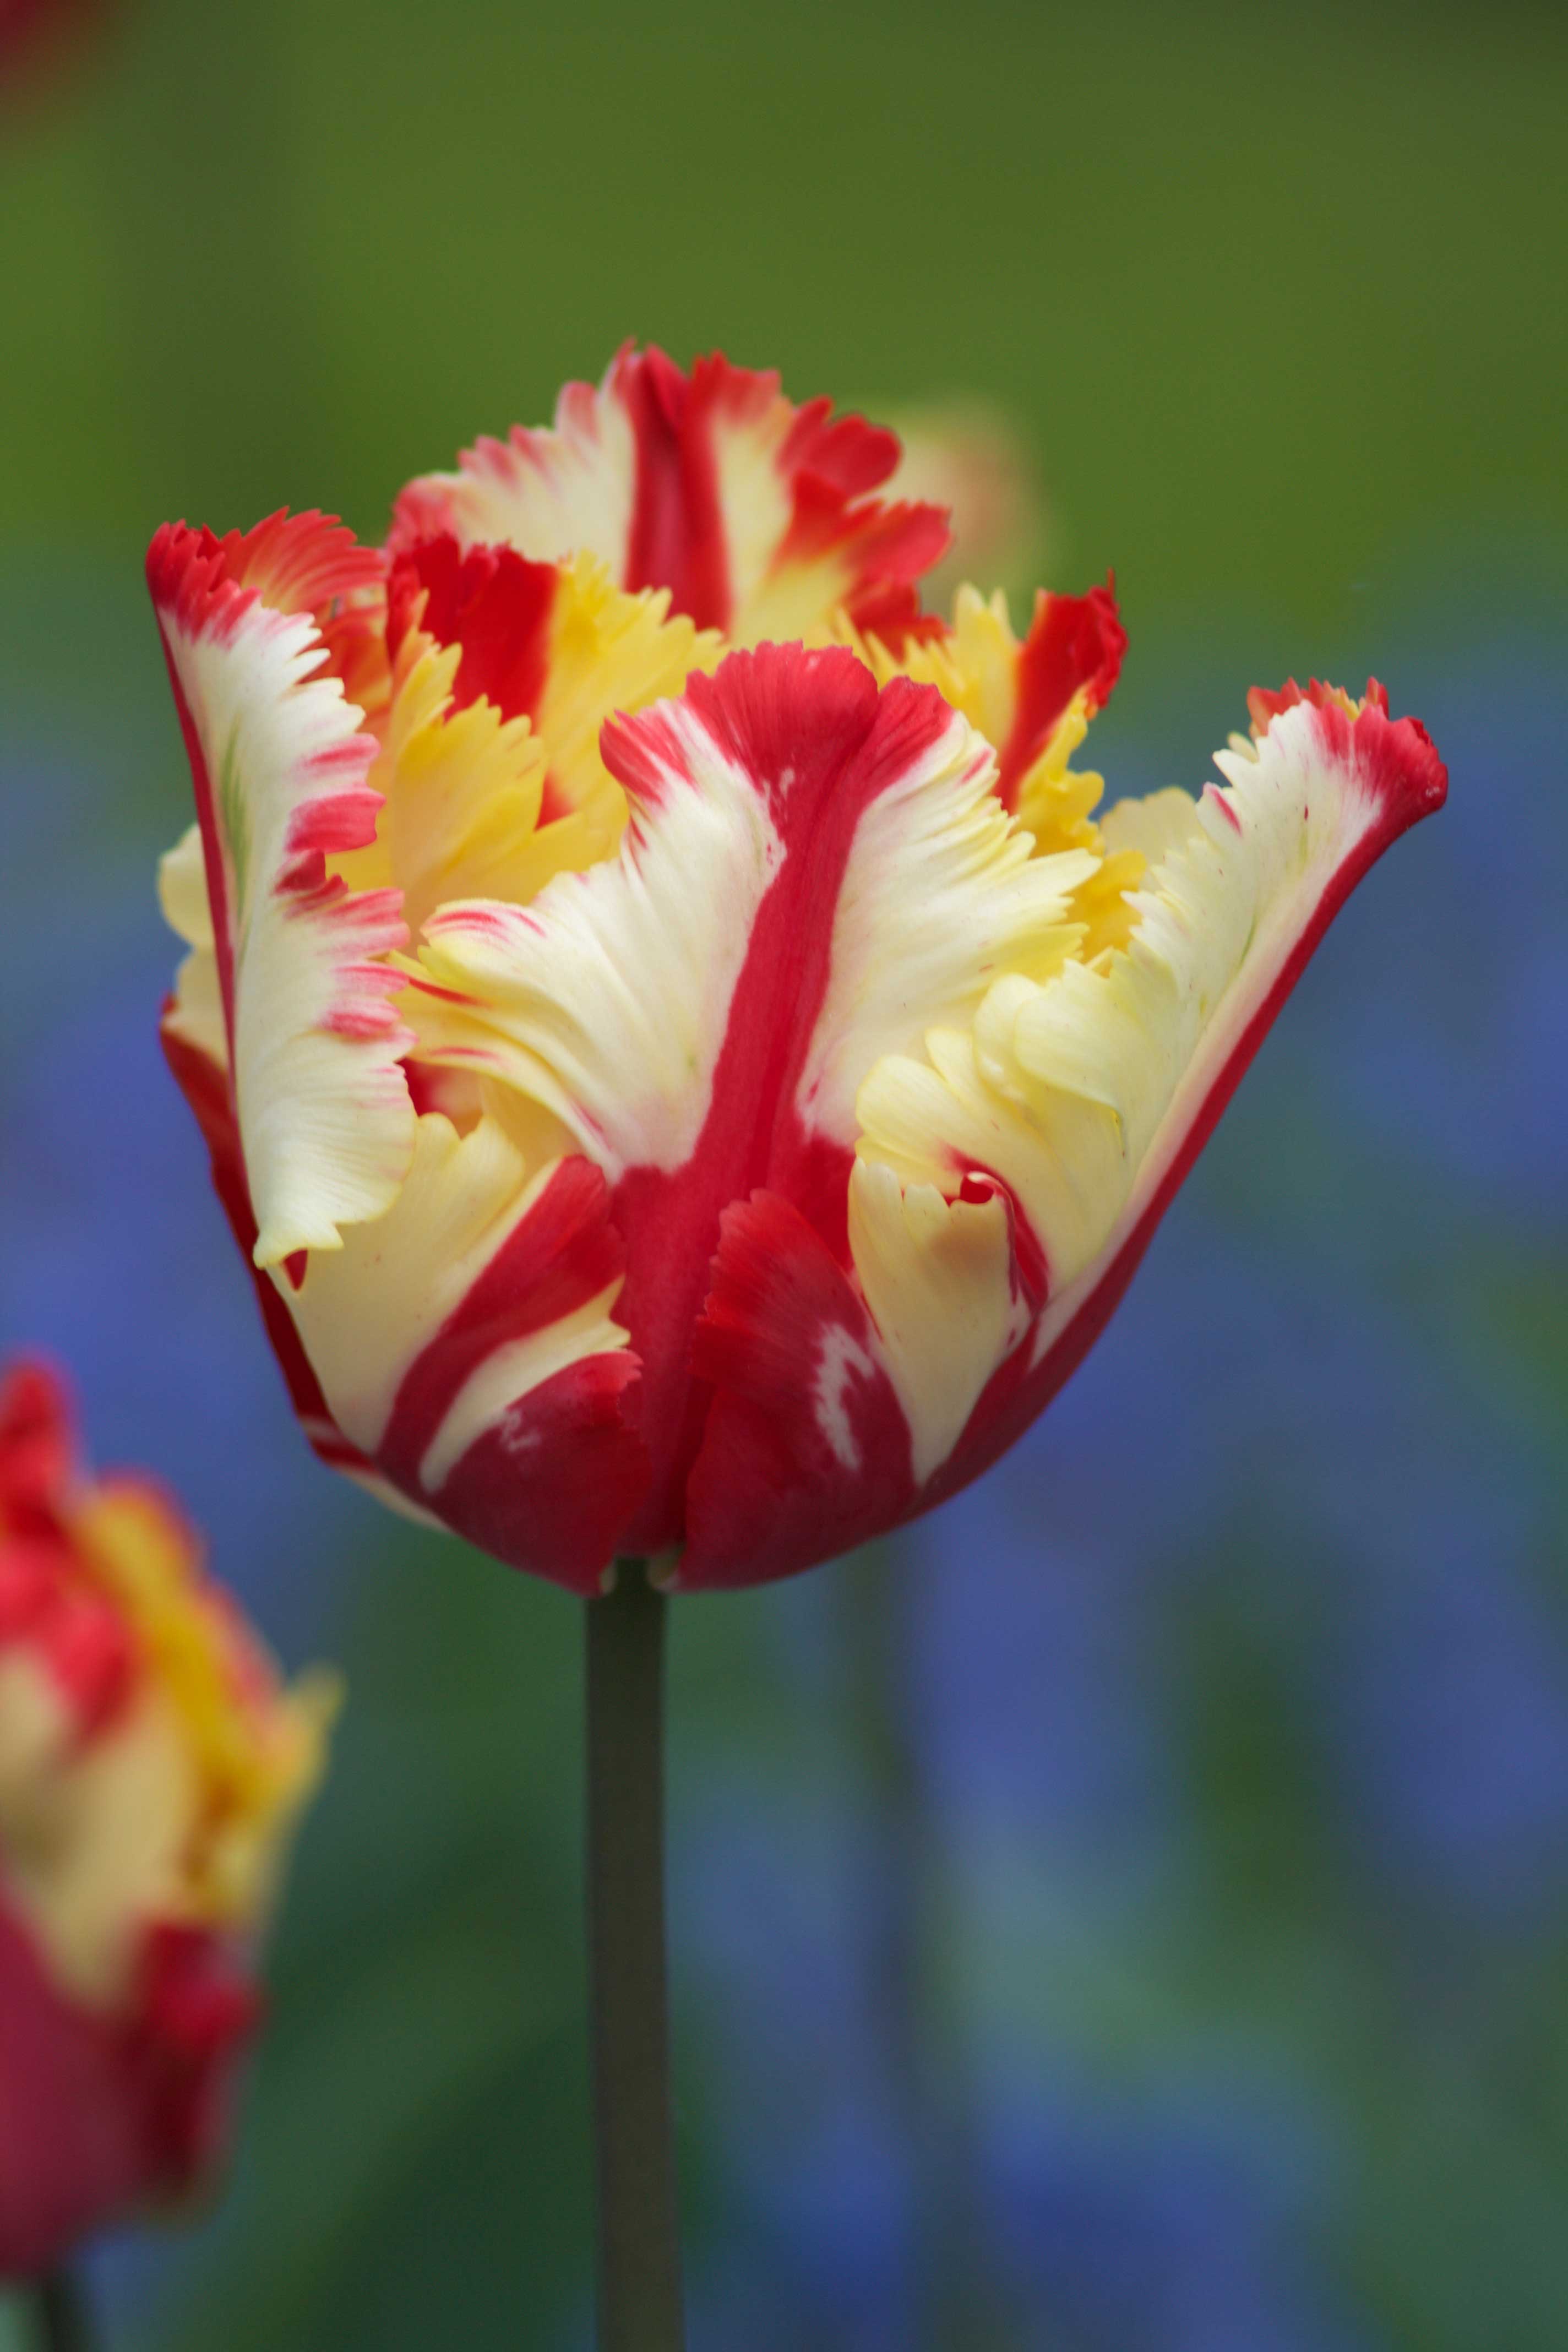 Parrot Tulips: Fancy and Flamboyant